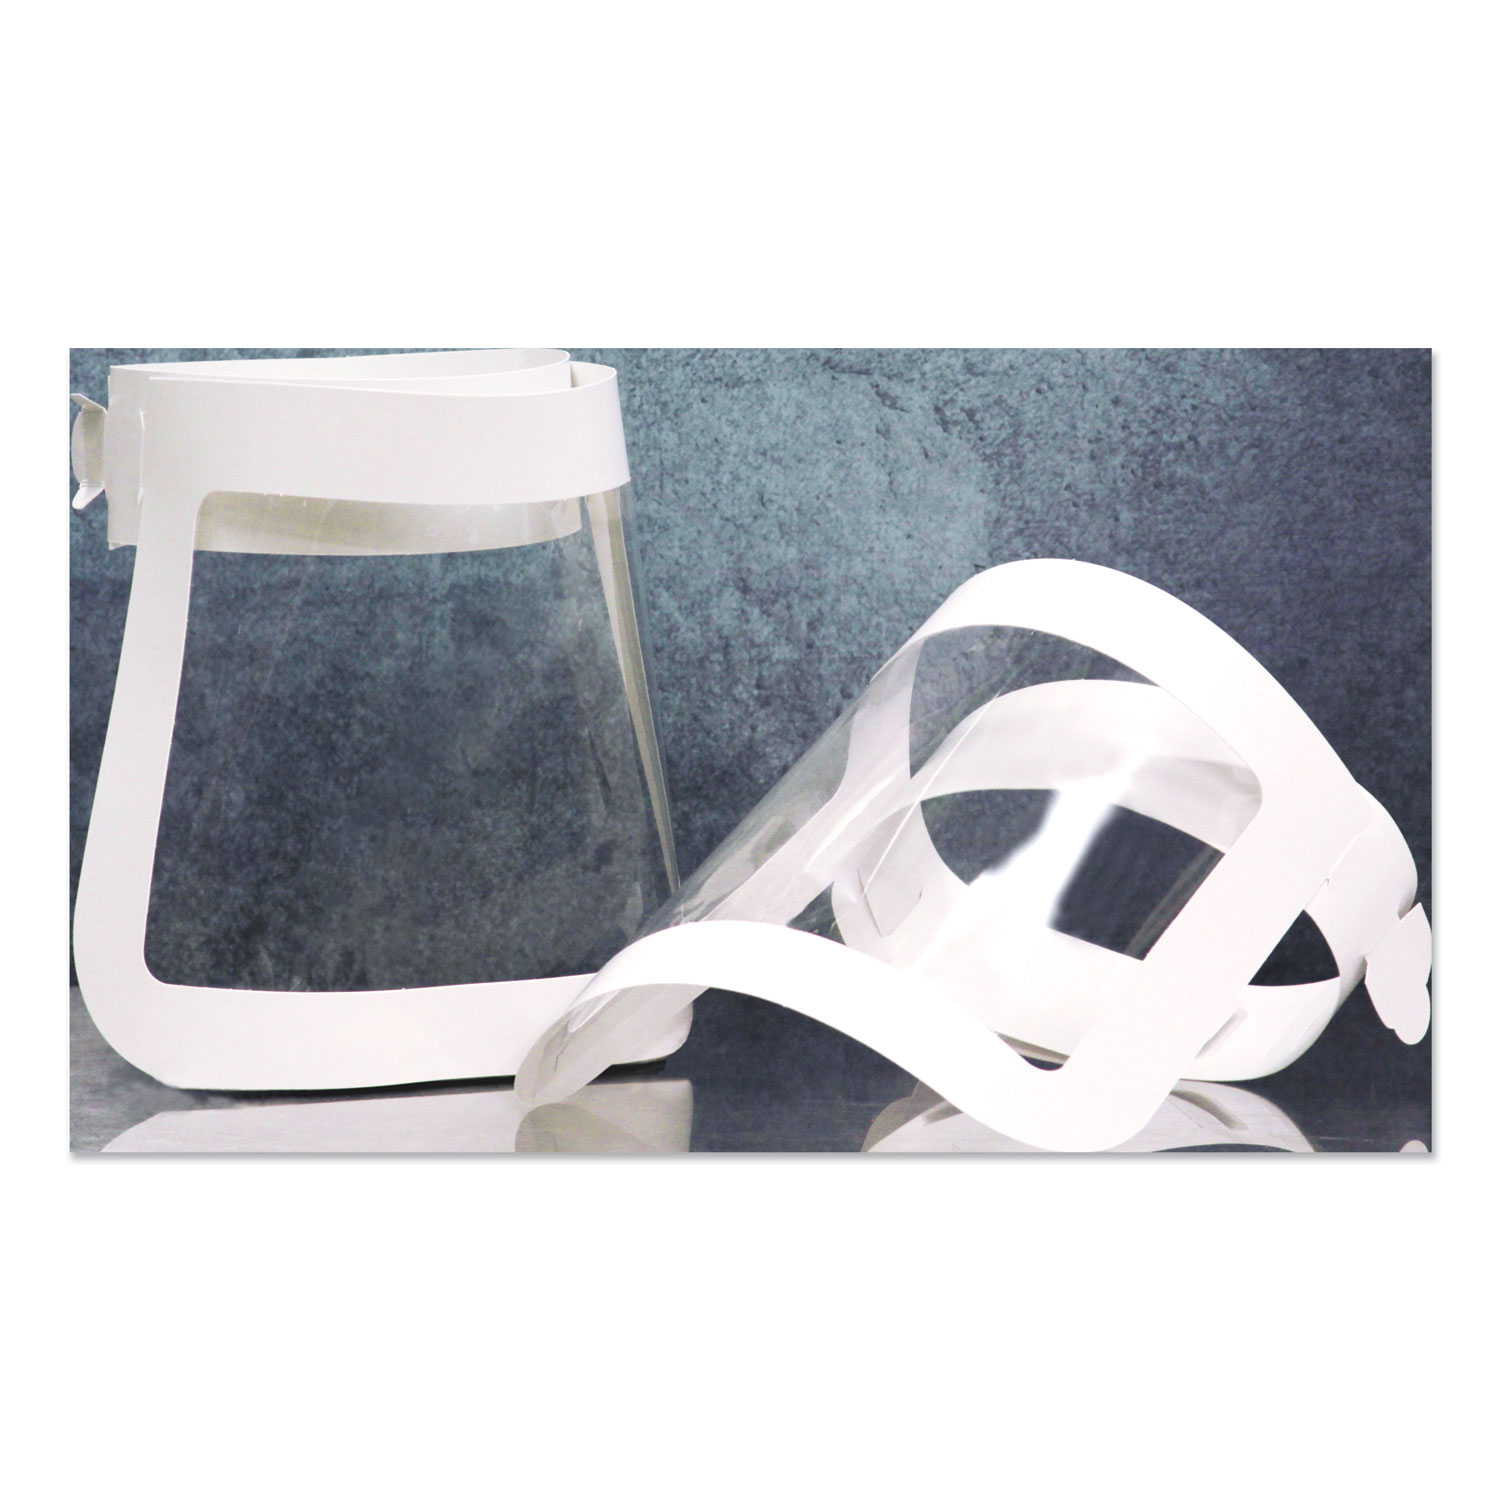  SCT 51SHLD100 Face Shield, 20.5 to 26.13 x 10.69, One Size Fits All, White/Clear, 225/Carton (GN151SHLD100) 